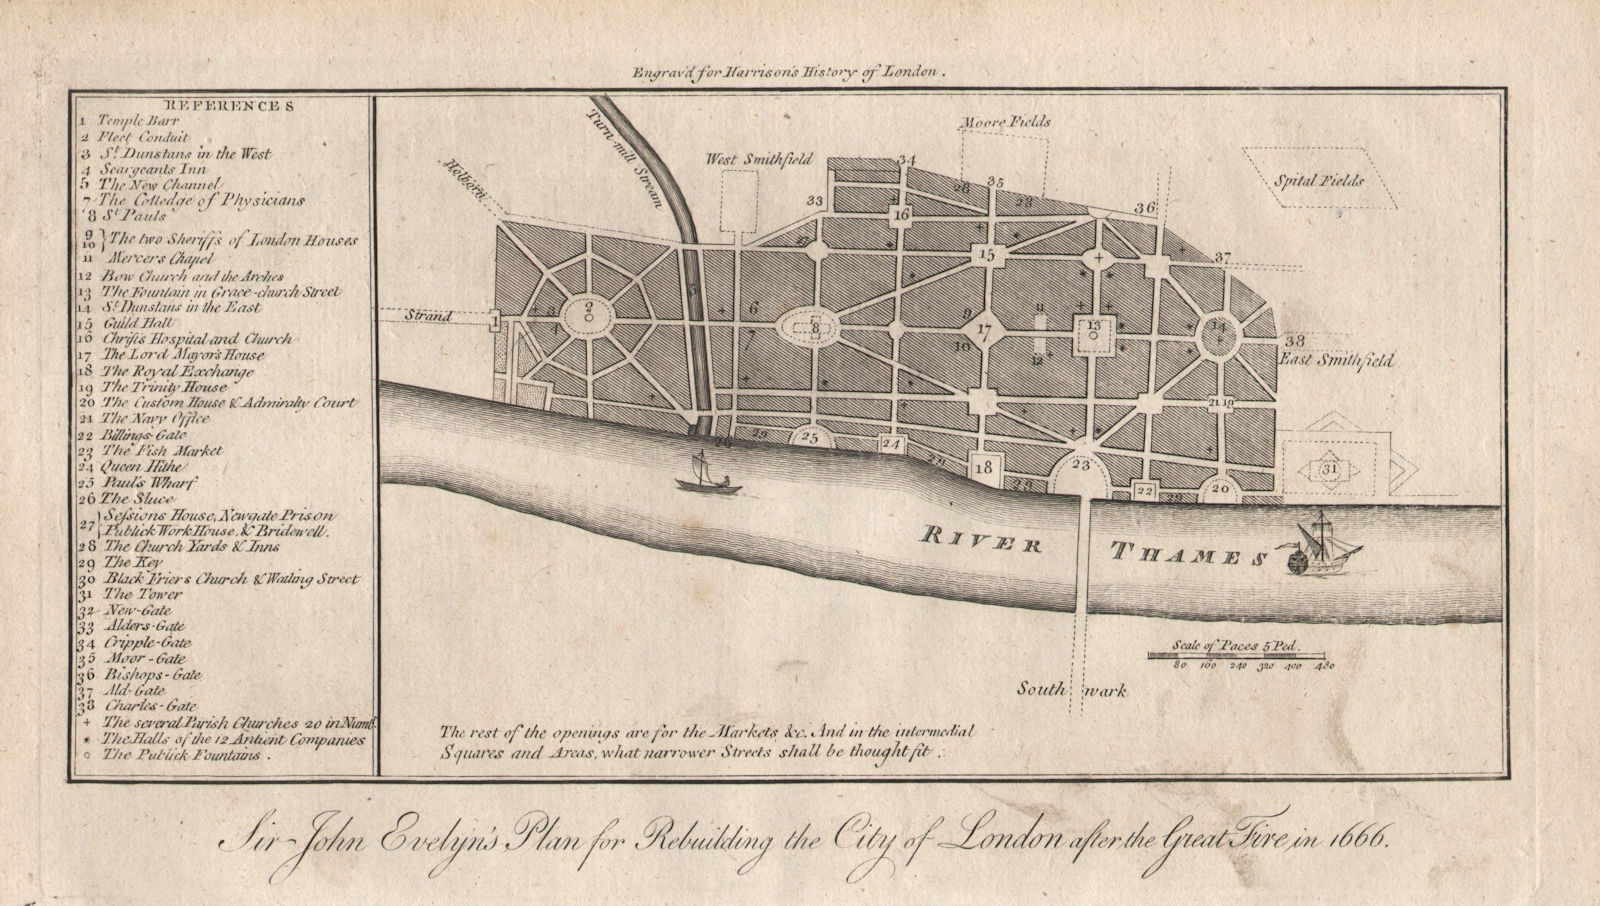 Associate Product Evelyn's City of London rebuilding plan after the 1666 fire. HARRISON 1776 map